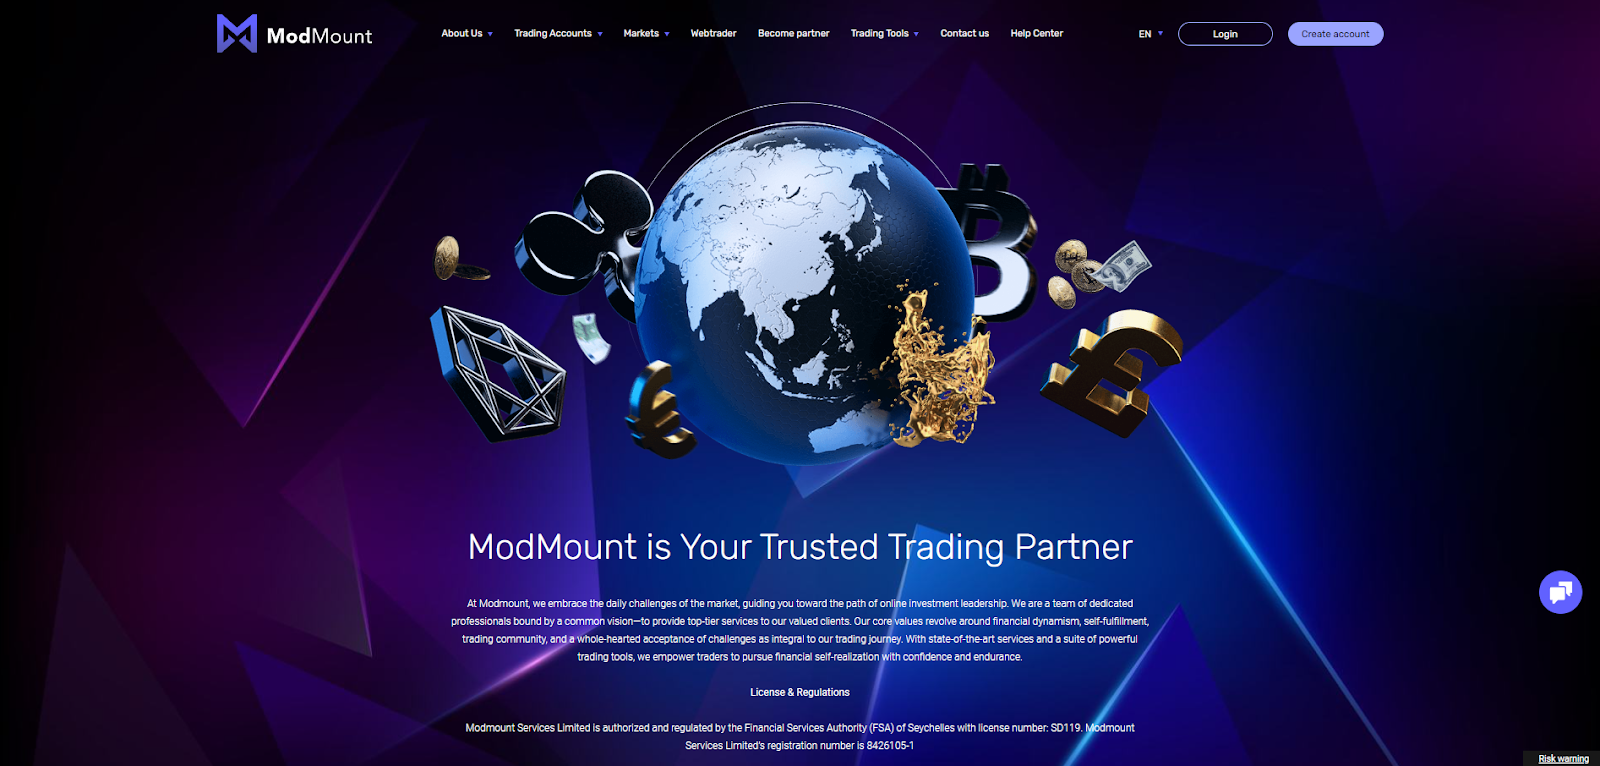 Read more about ModMount’s Regulation and Safety Measures on their website